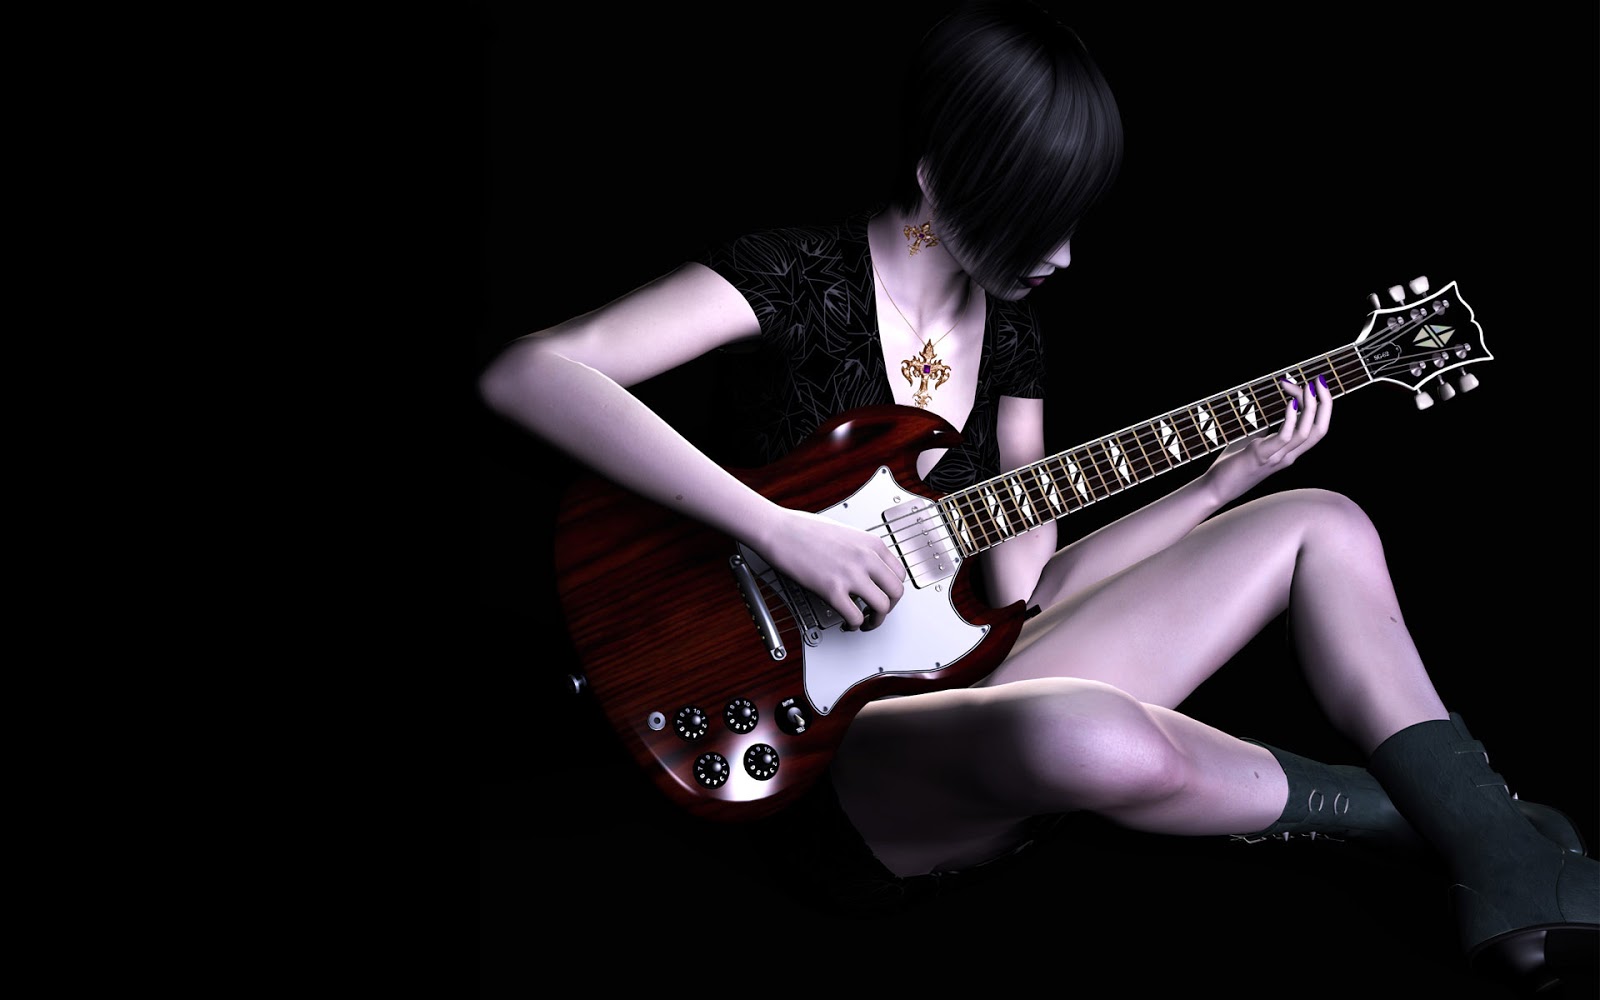  hd so get free download guitar wallpapers and make your desktop cool